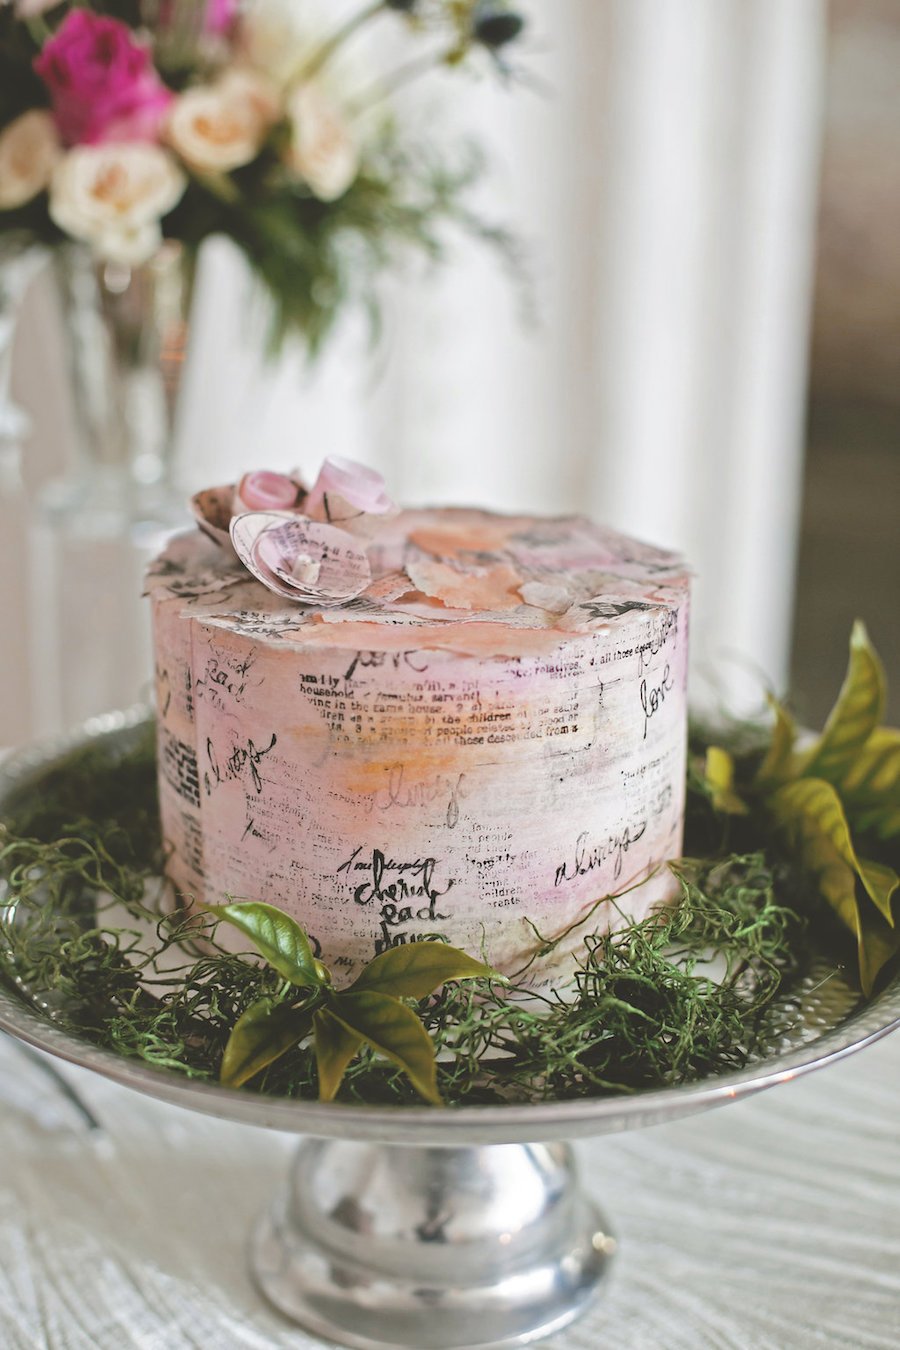 Small, Blush Wedding Cake with Writing and Small Floral Details | Bohemian/Boho Styled Wedding Shoot